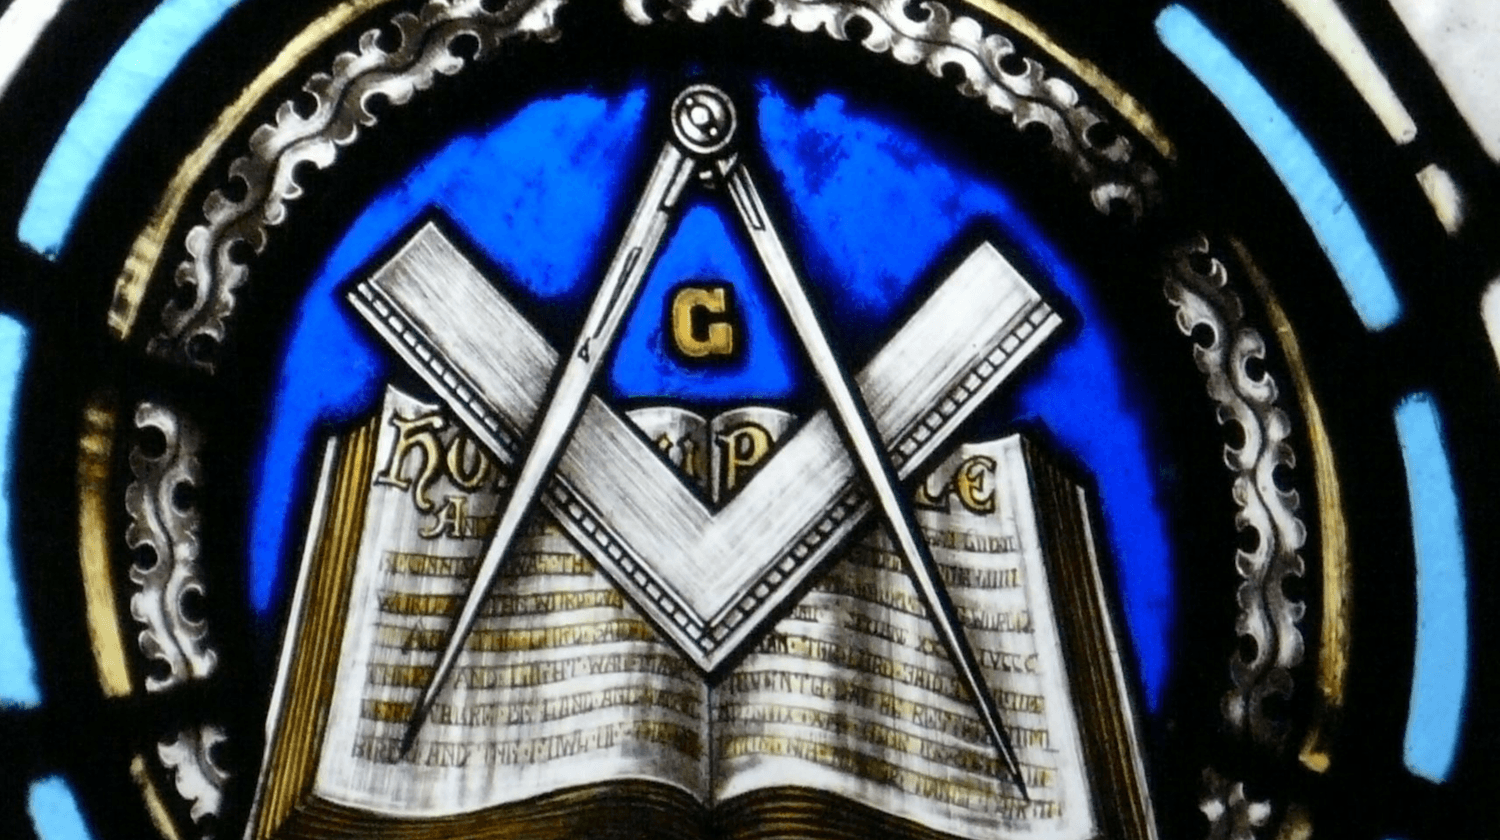 how did freemasons contribute to society